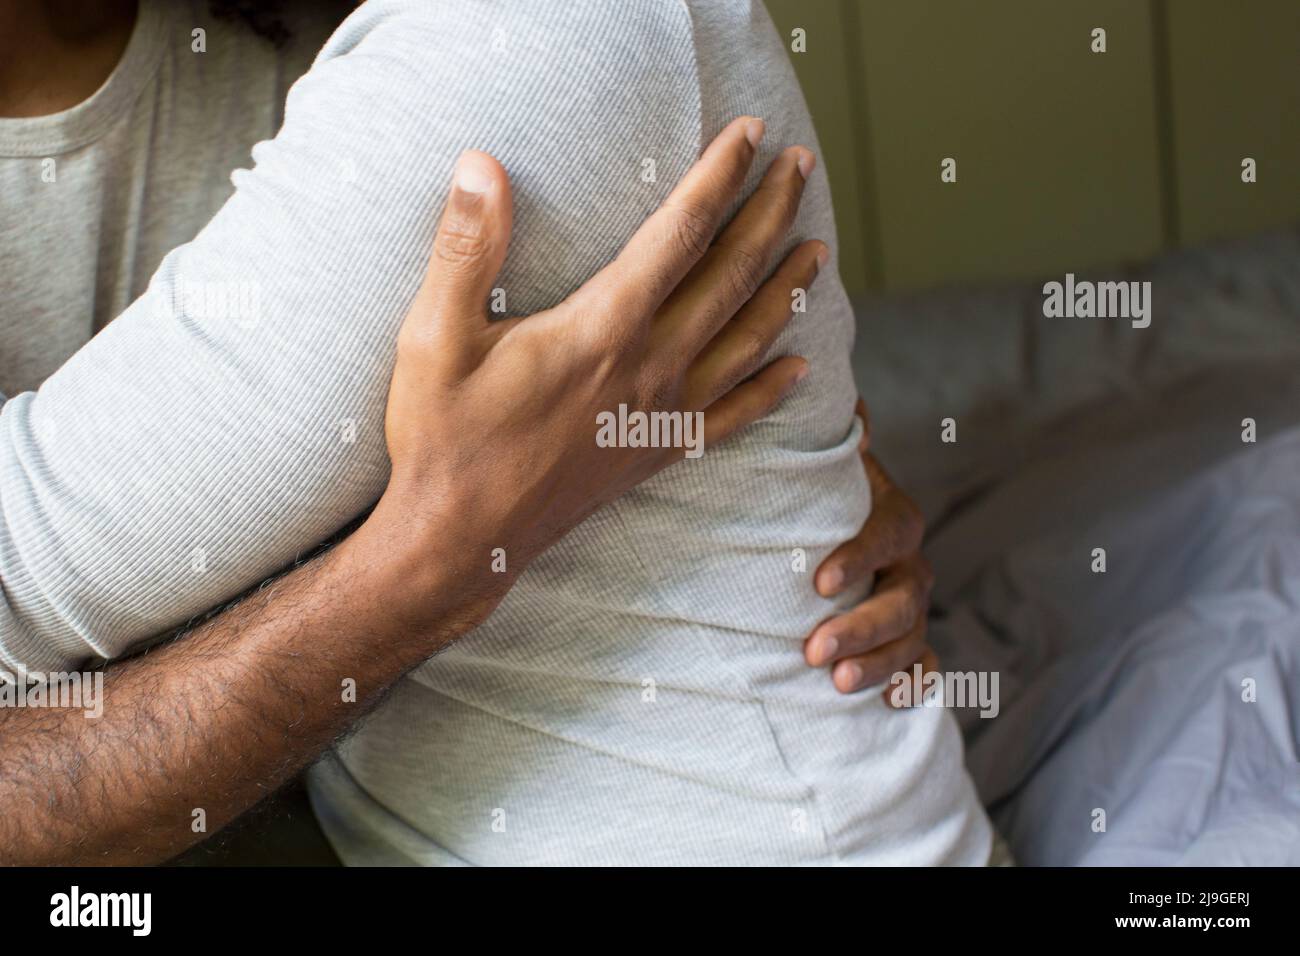 Hand of a man holding a woman sitting on bed Stock Photo